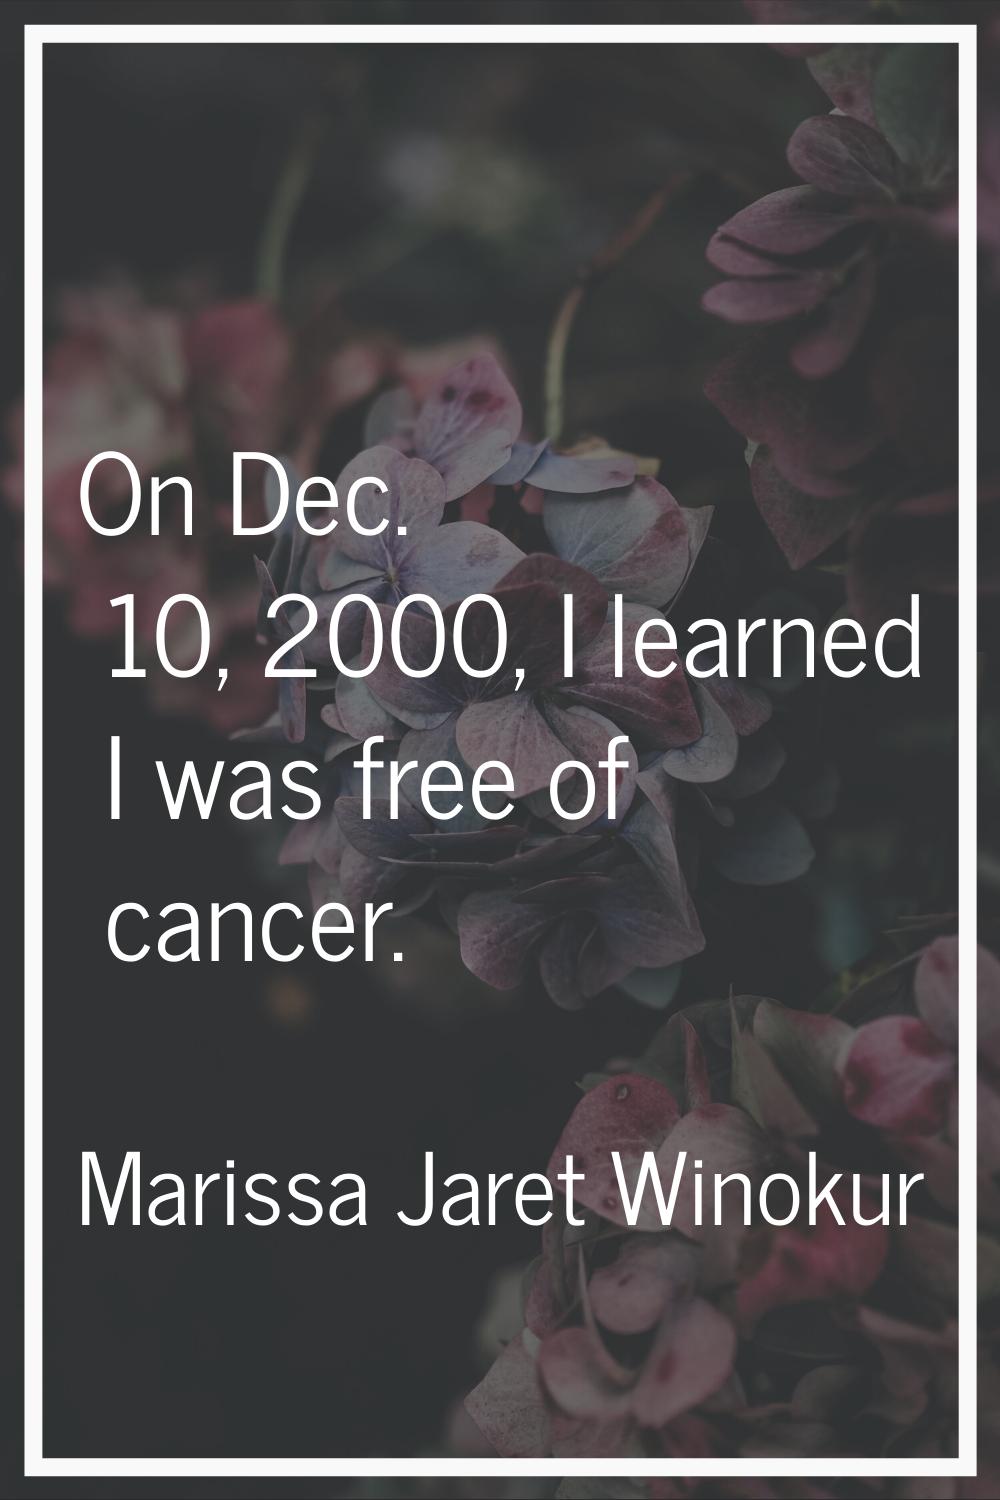 On Dec. 10, 2000, I learned I was free of cancer.